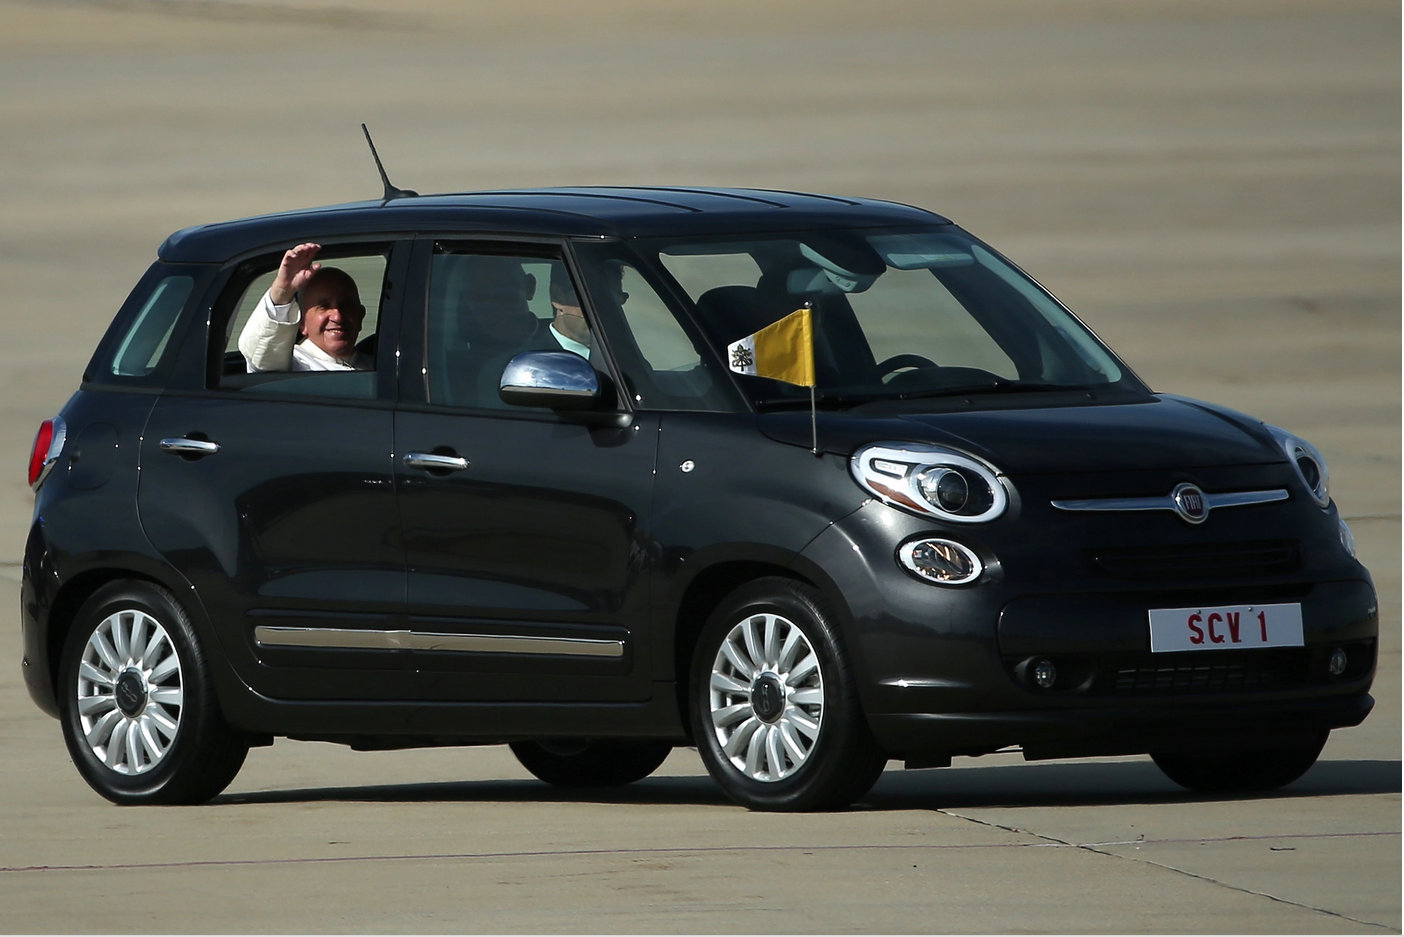 Test-driving the Fiat 500L, yesterday